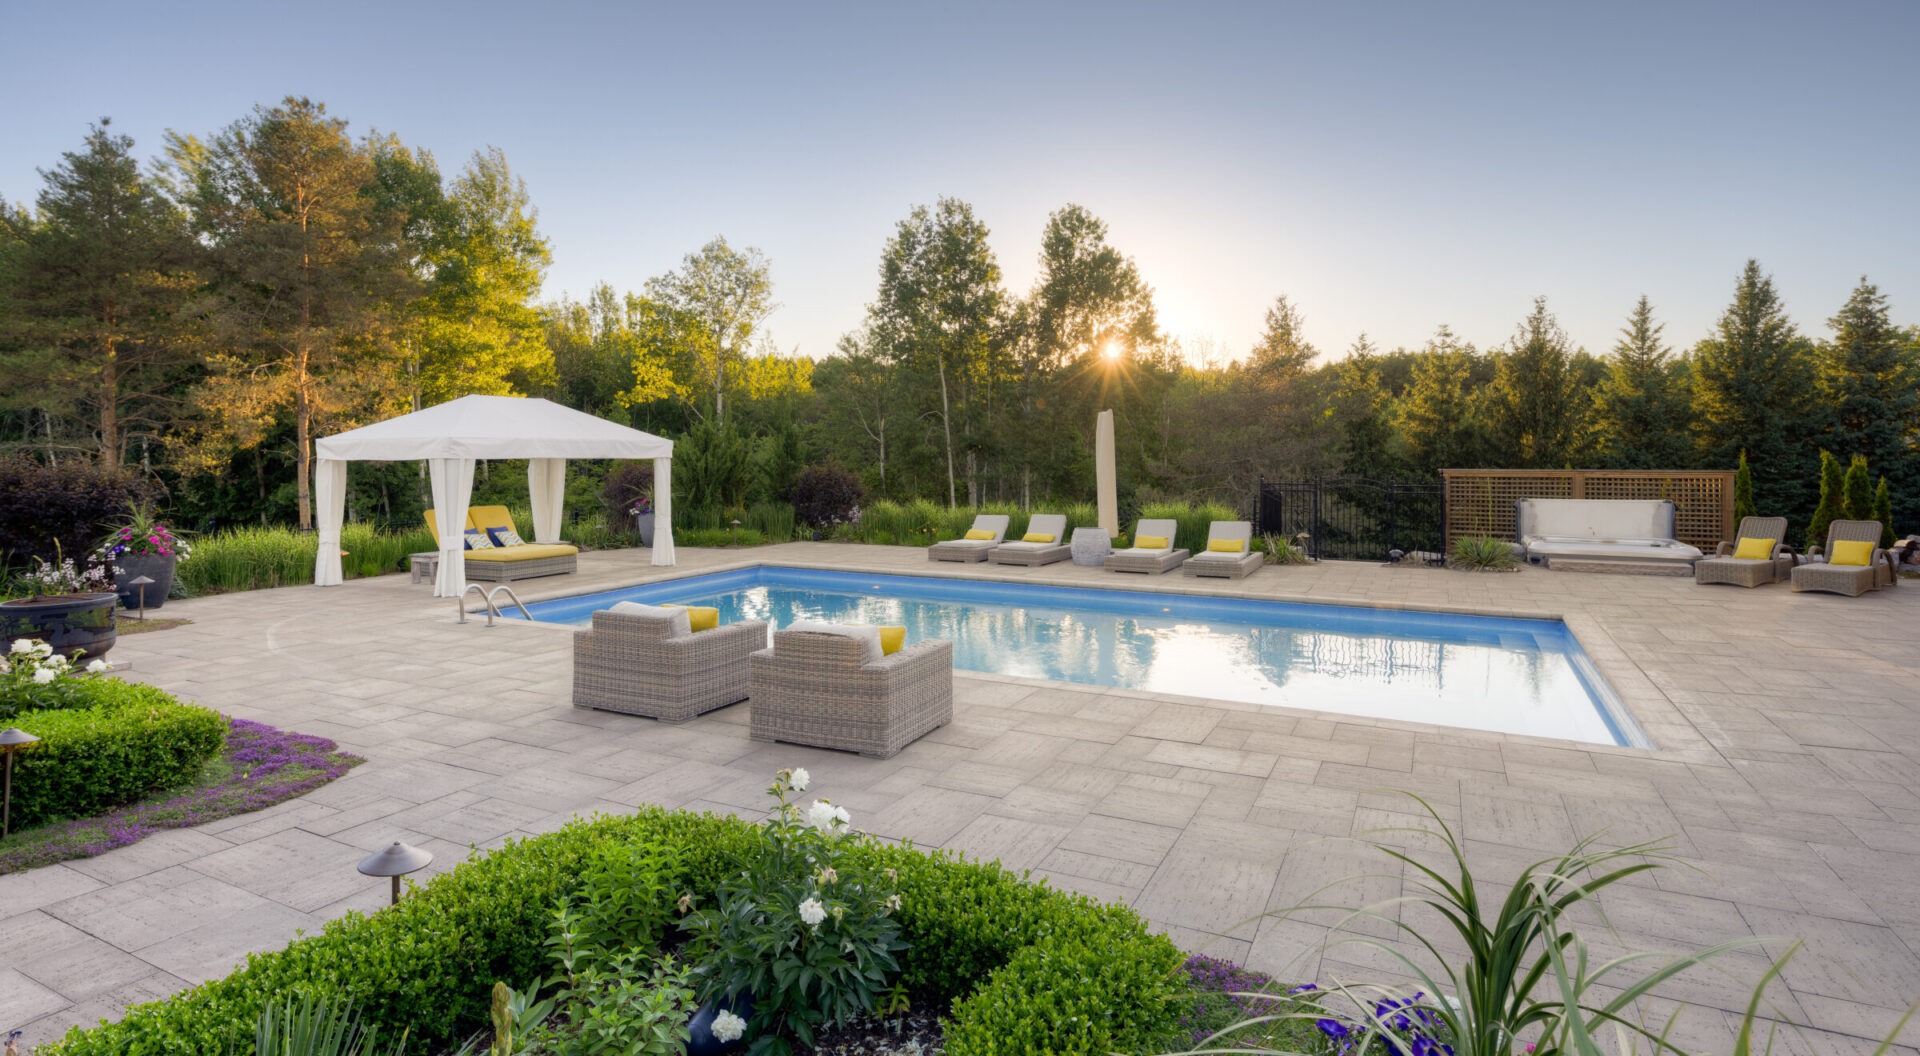 A luxurious backyard with a swimming pool during sunset, surrounded by trees, features a gazebo, loungers, and a seating area with plush furniture.